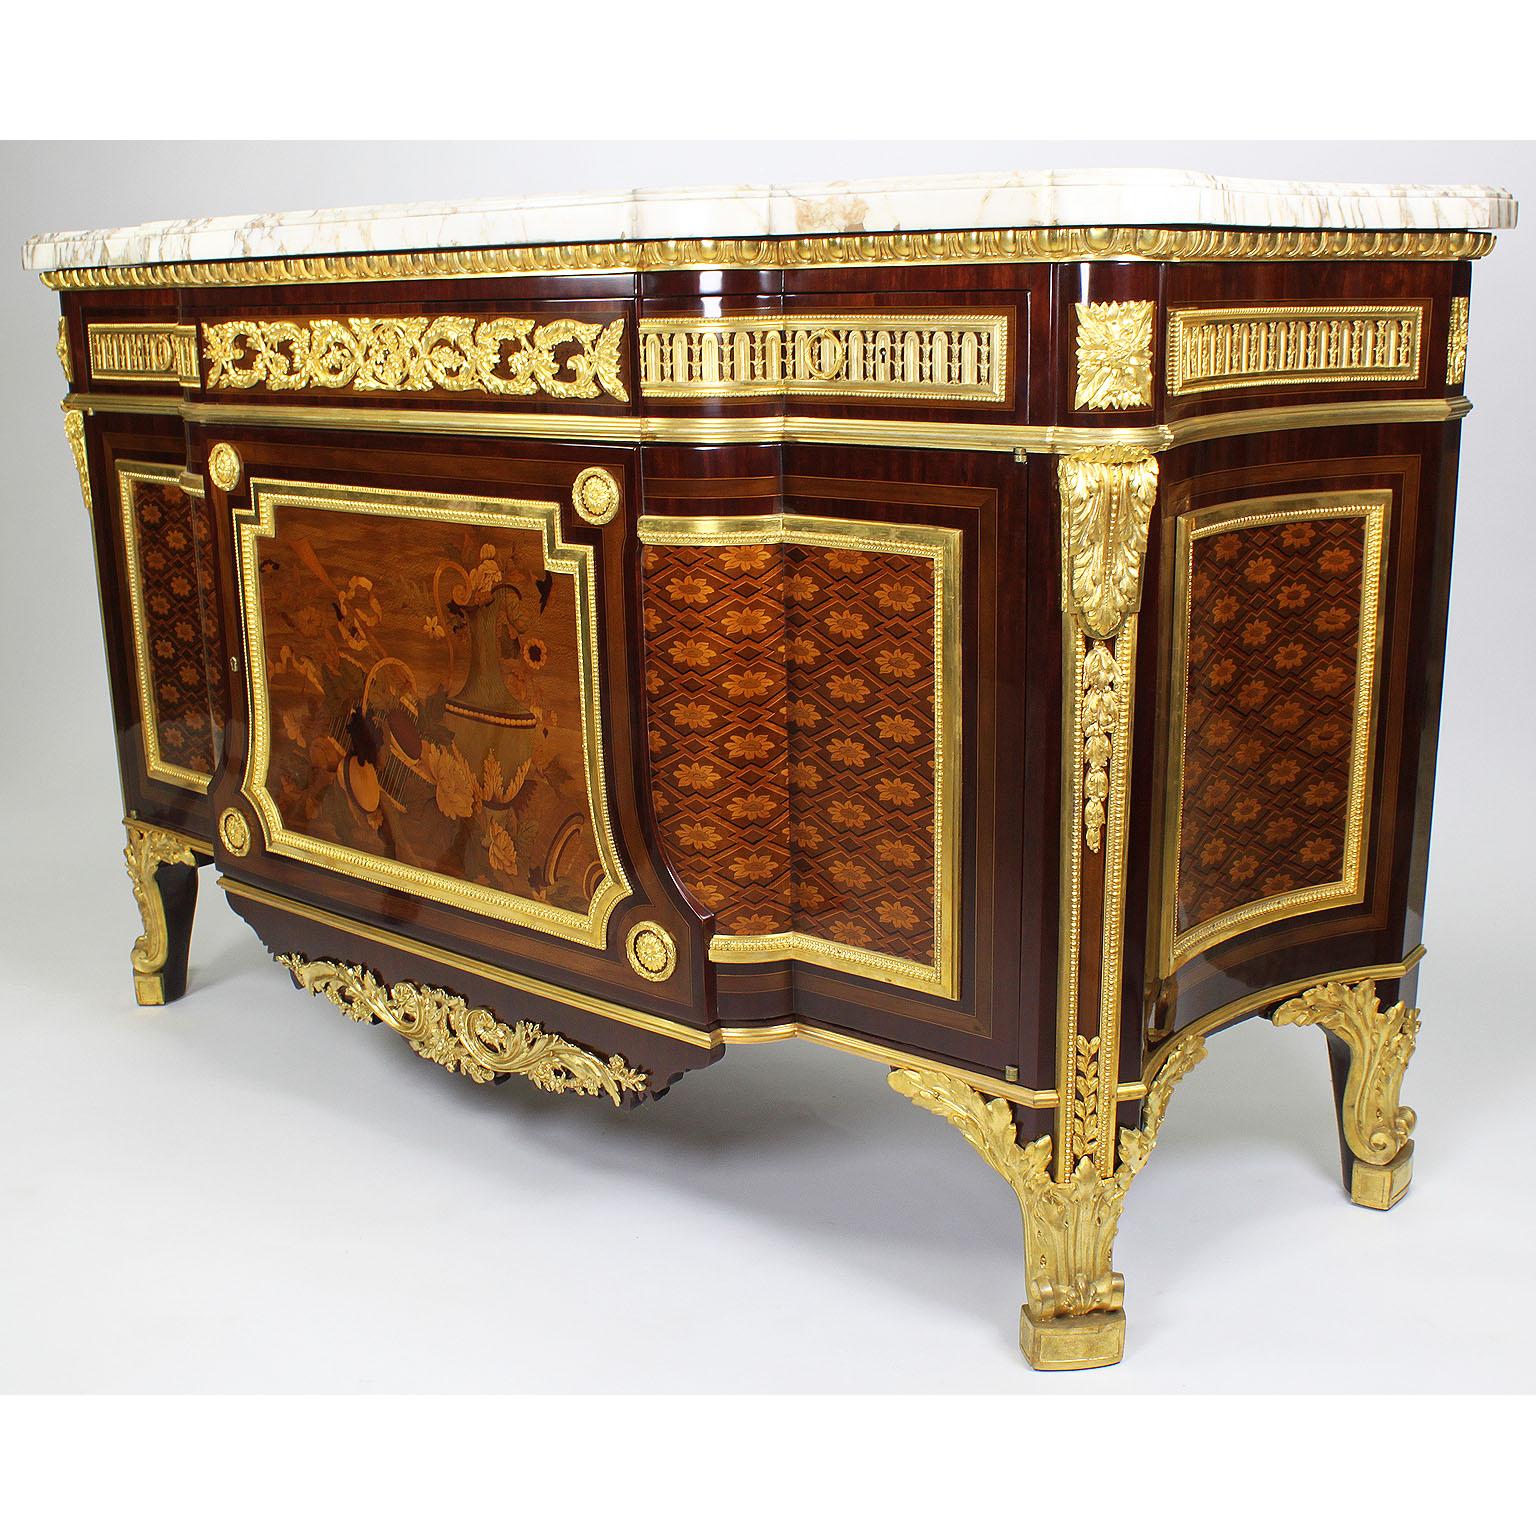 A fine French 19th century Louis XVI style ormolu-mounted mahogany, fruitwood and sycamore marquetry and parquetry commode with a Brèche Violette marble-top, after the model by Jean-Henri Riesener (1734-1806), one lock has been removed to reveal the